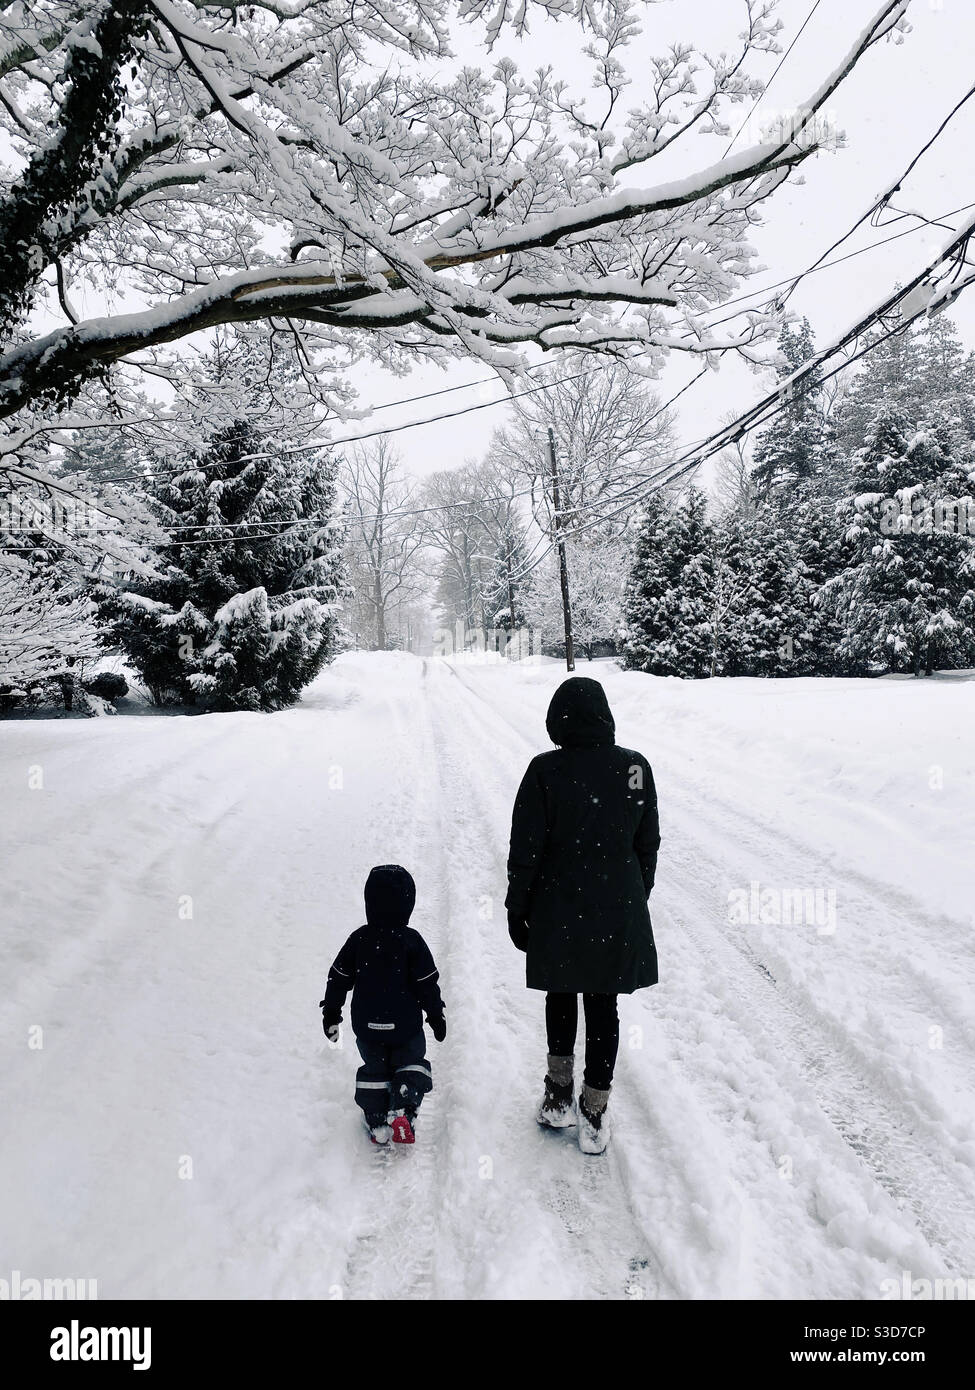 A mother and three year old child walking down a snowy street together during a snowfall in New Jersey. Stock Photo